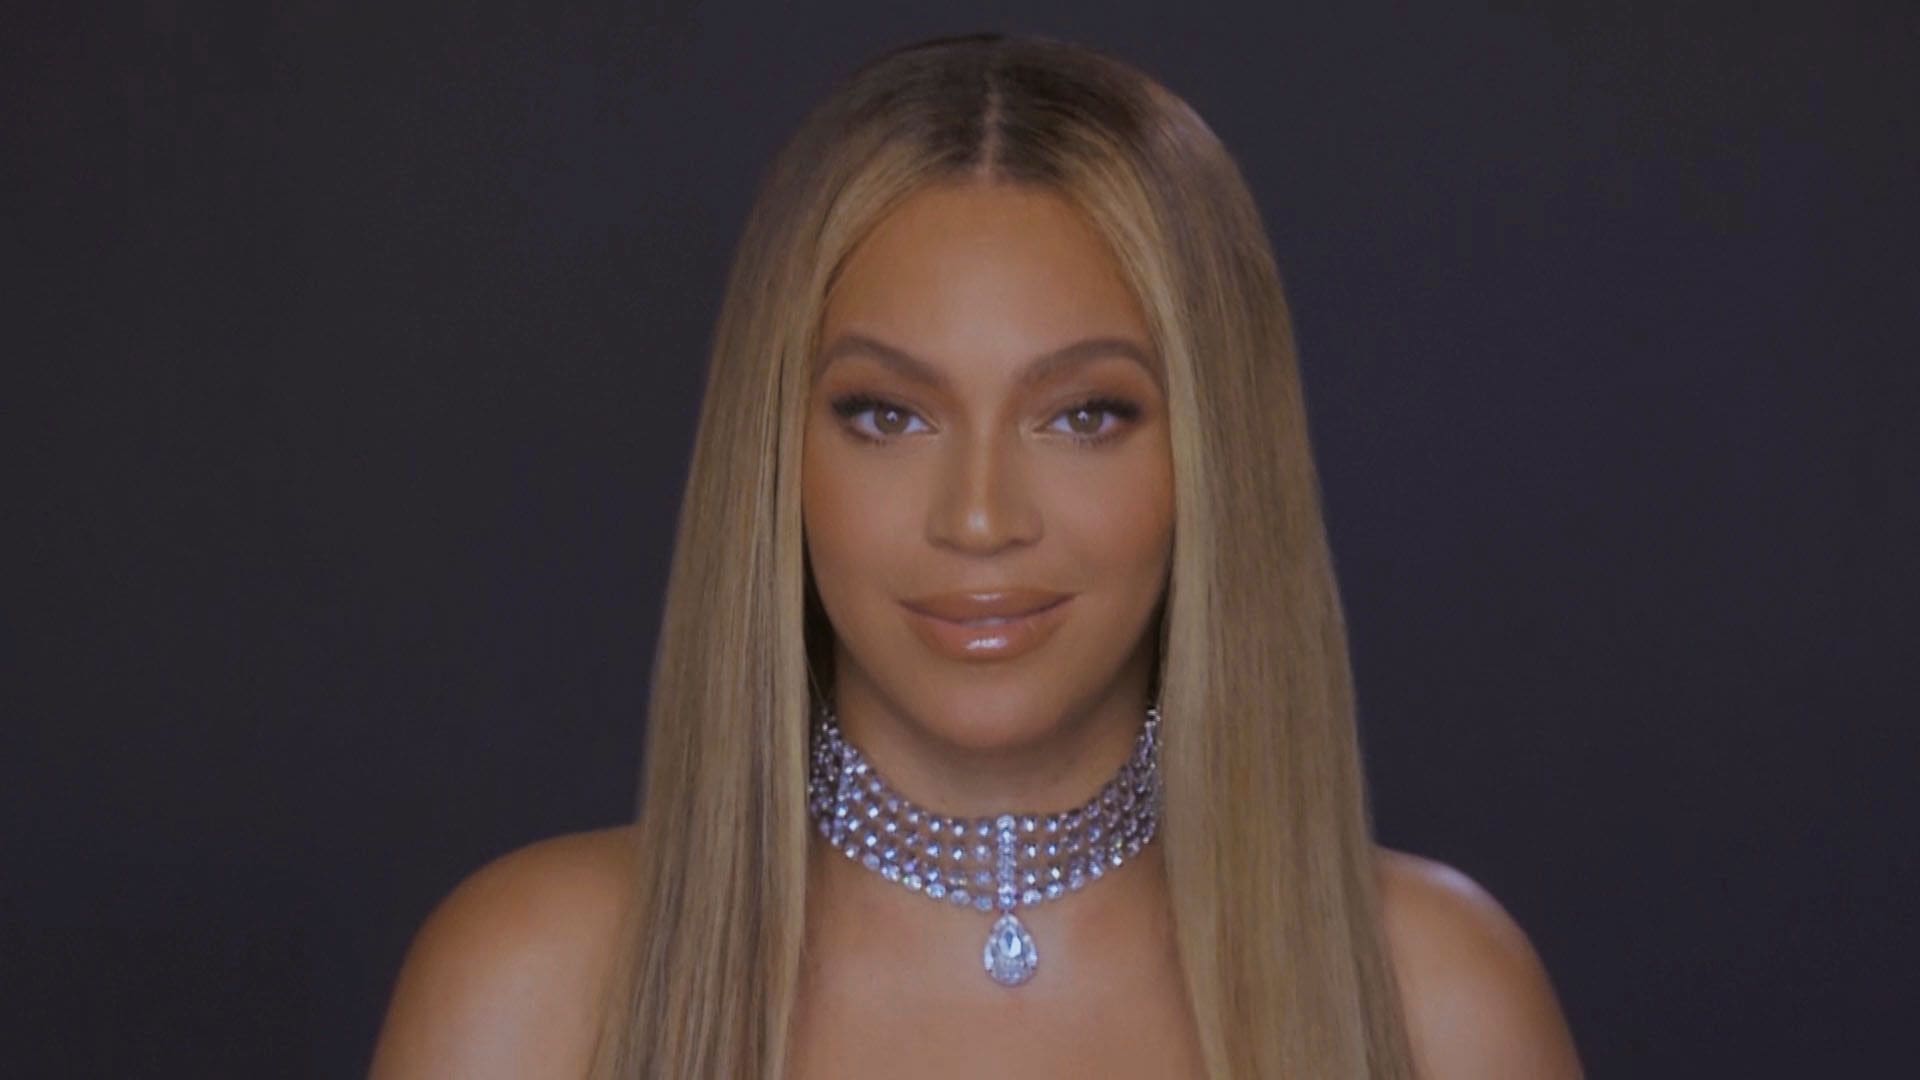 ”new-album-act-i-renaissance-7-29-by-beyonce-coming-up-in-july-this-summer”